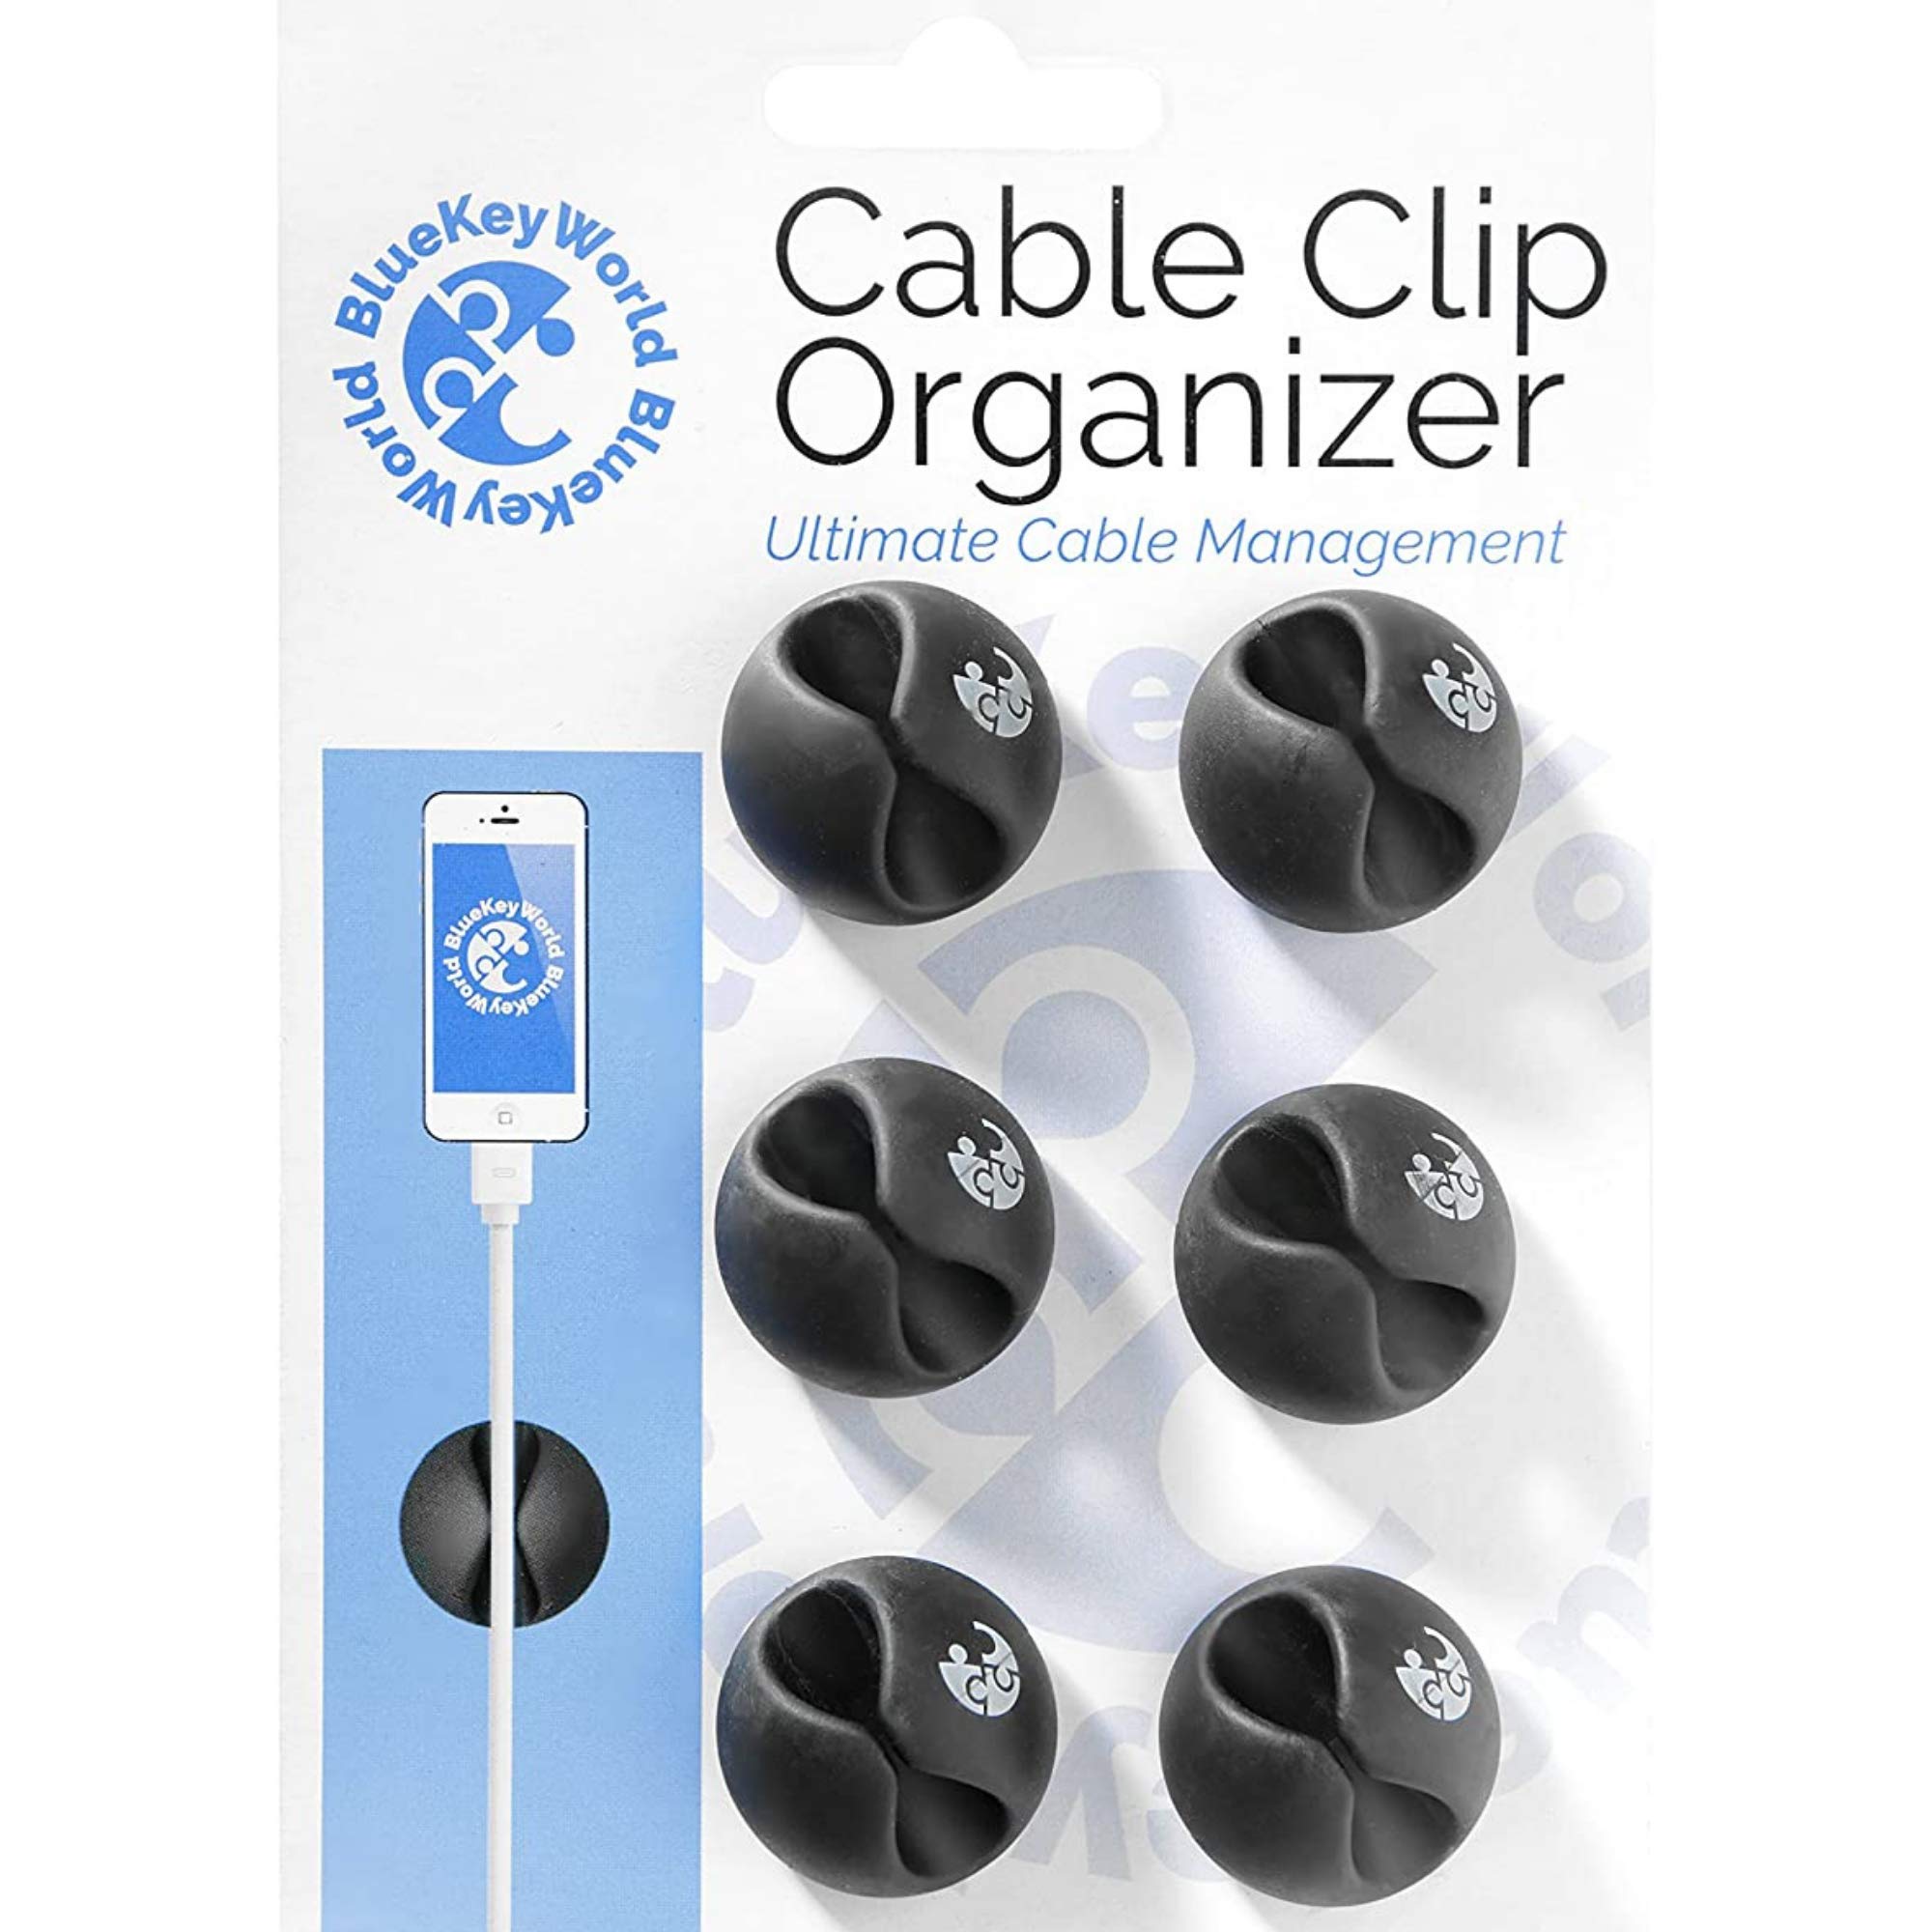 Book Cover Cable Clips Management - Nightstand Accessories - Cord Organizer - Desk Cable Management - Wire Holder System - Adhesive Cord Clips - Home, Office, Cubicle, Car - Gift Idea - Black